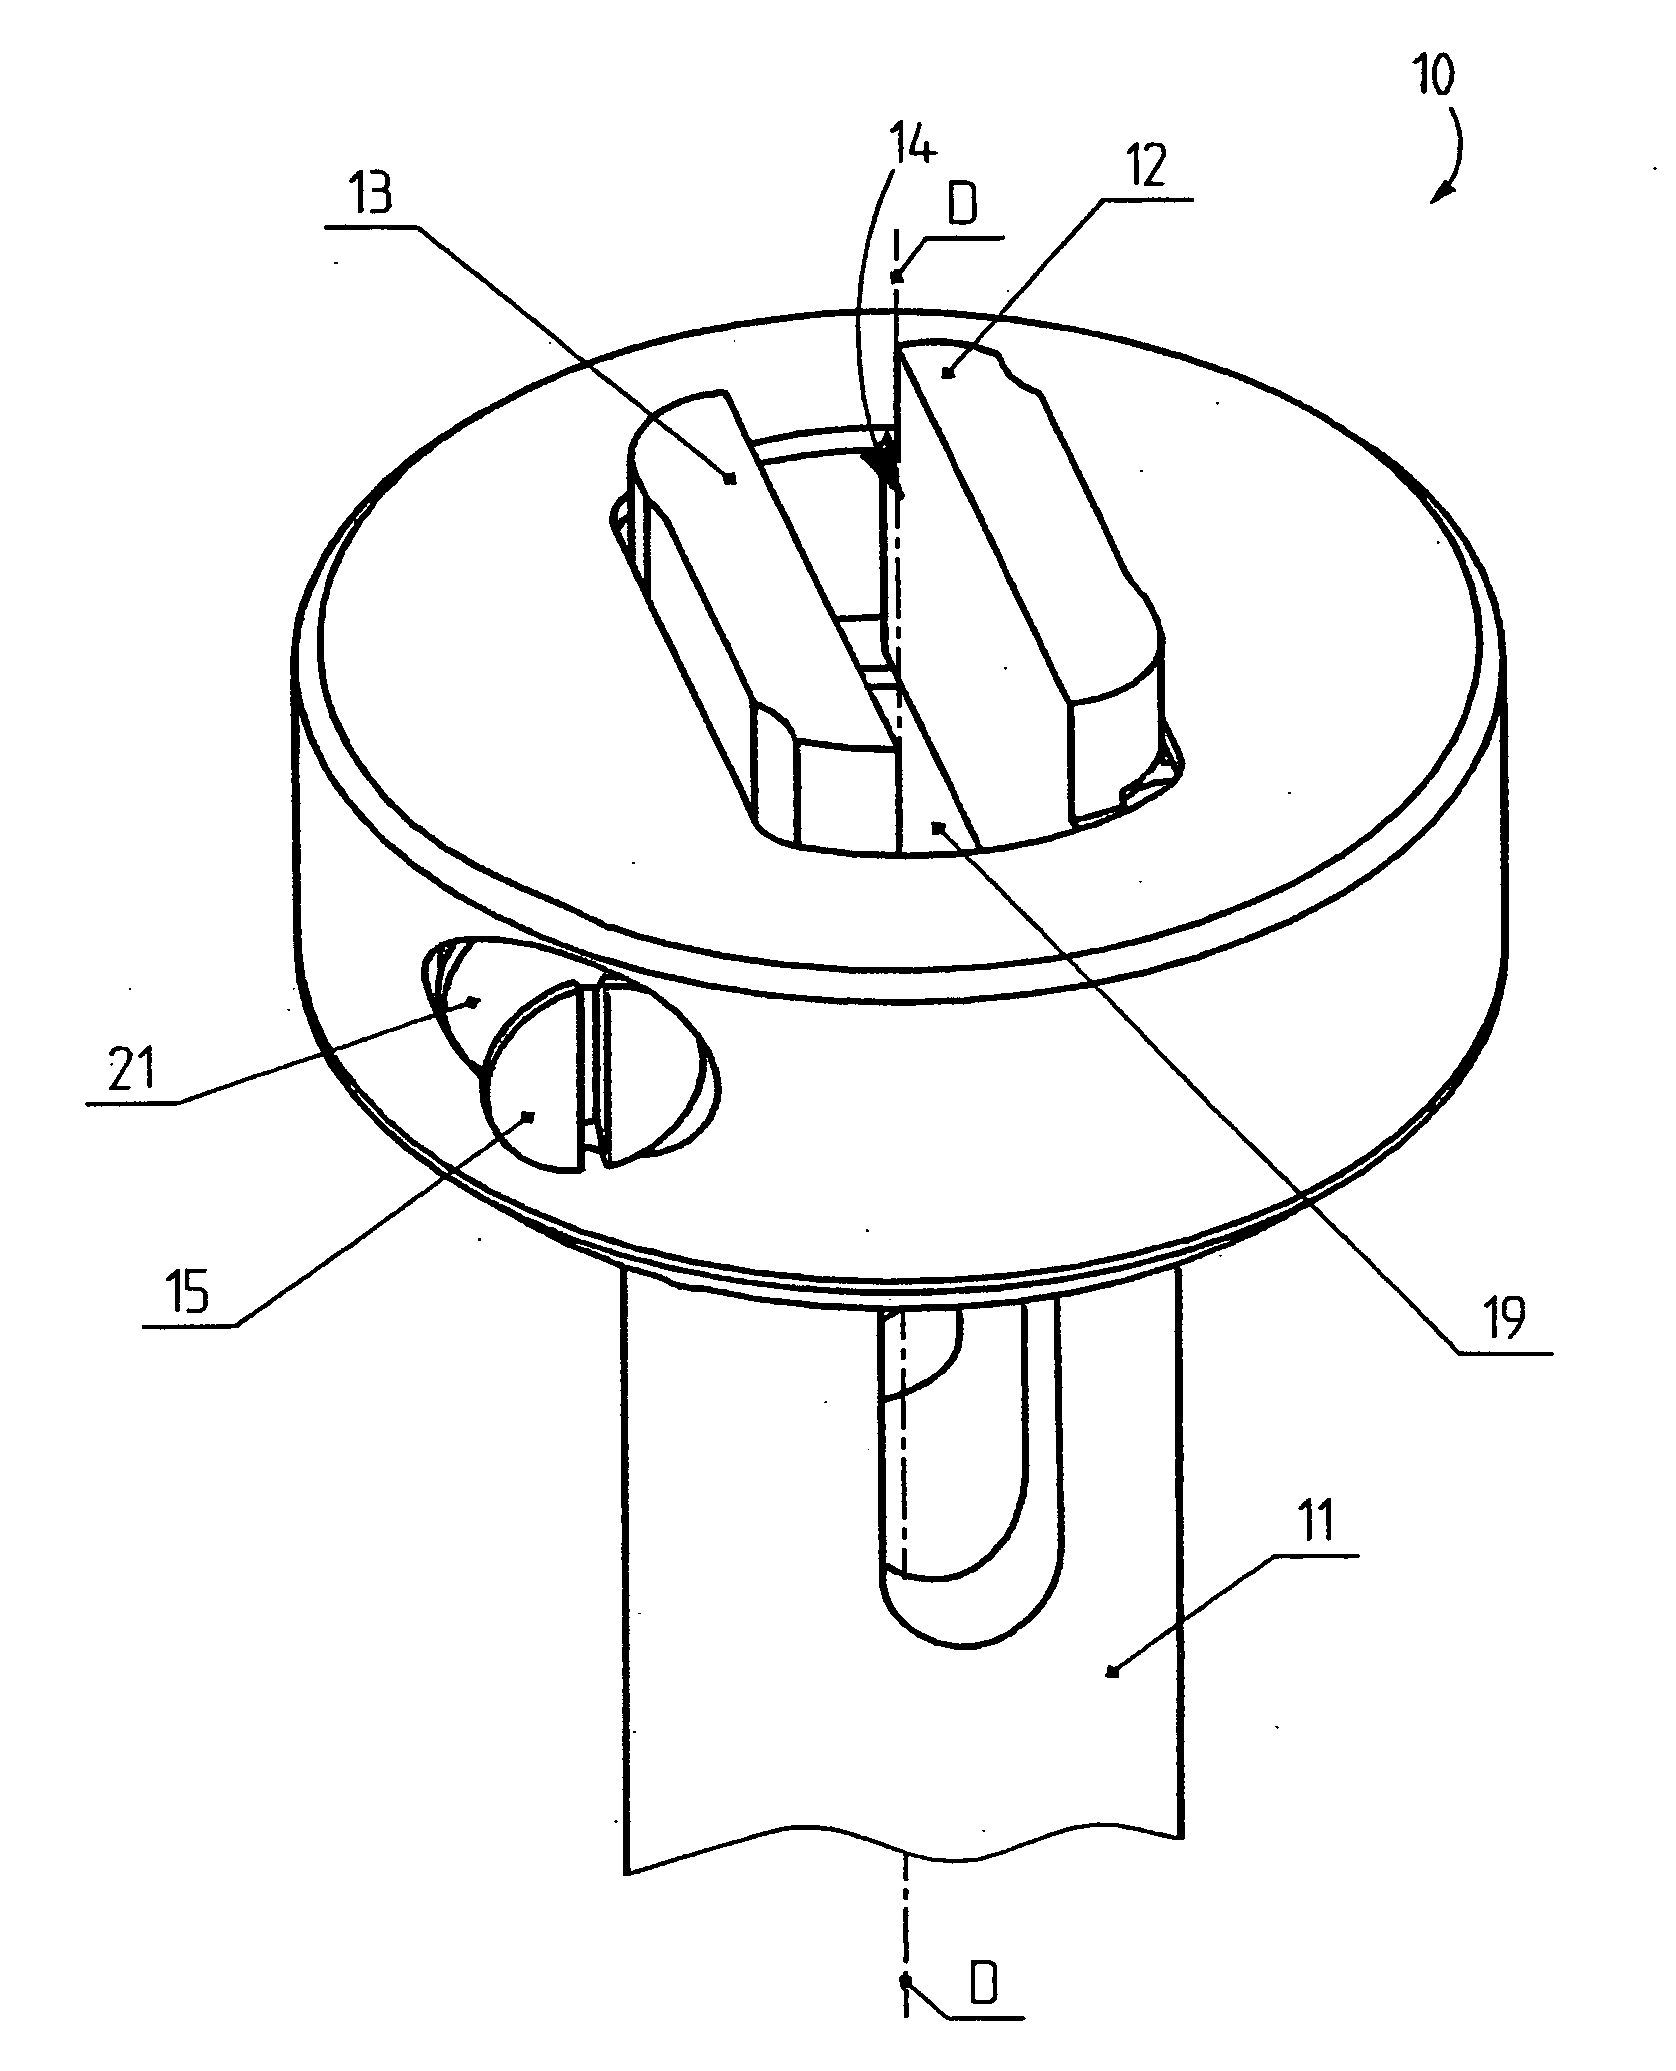 Test body clamping device in a rheometer